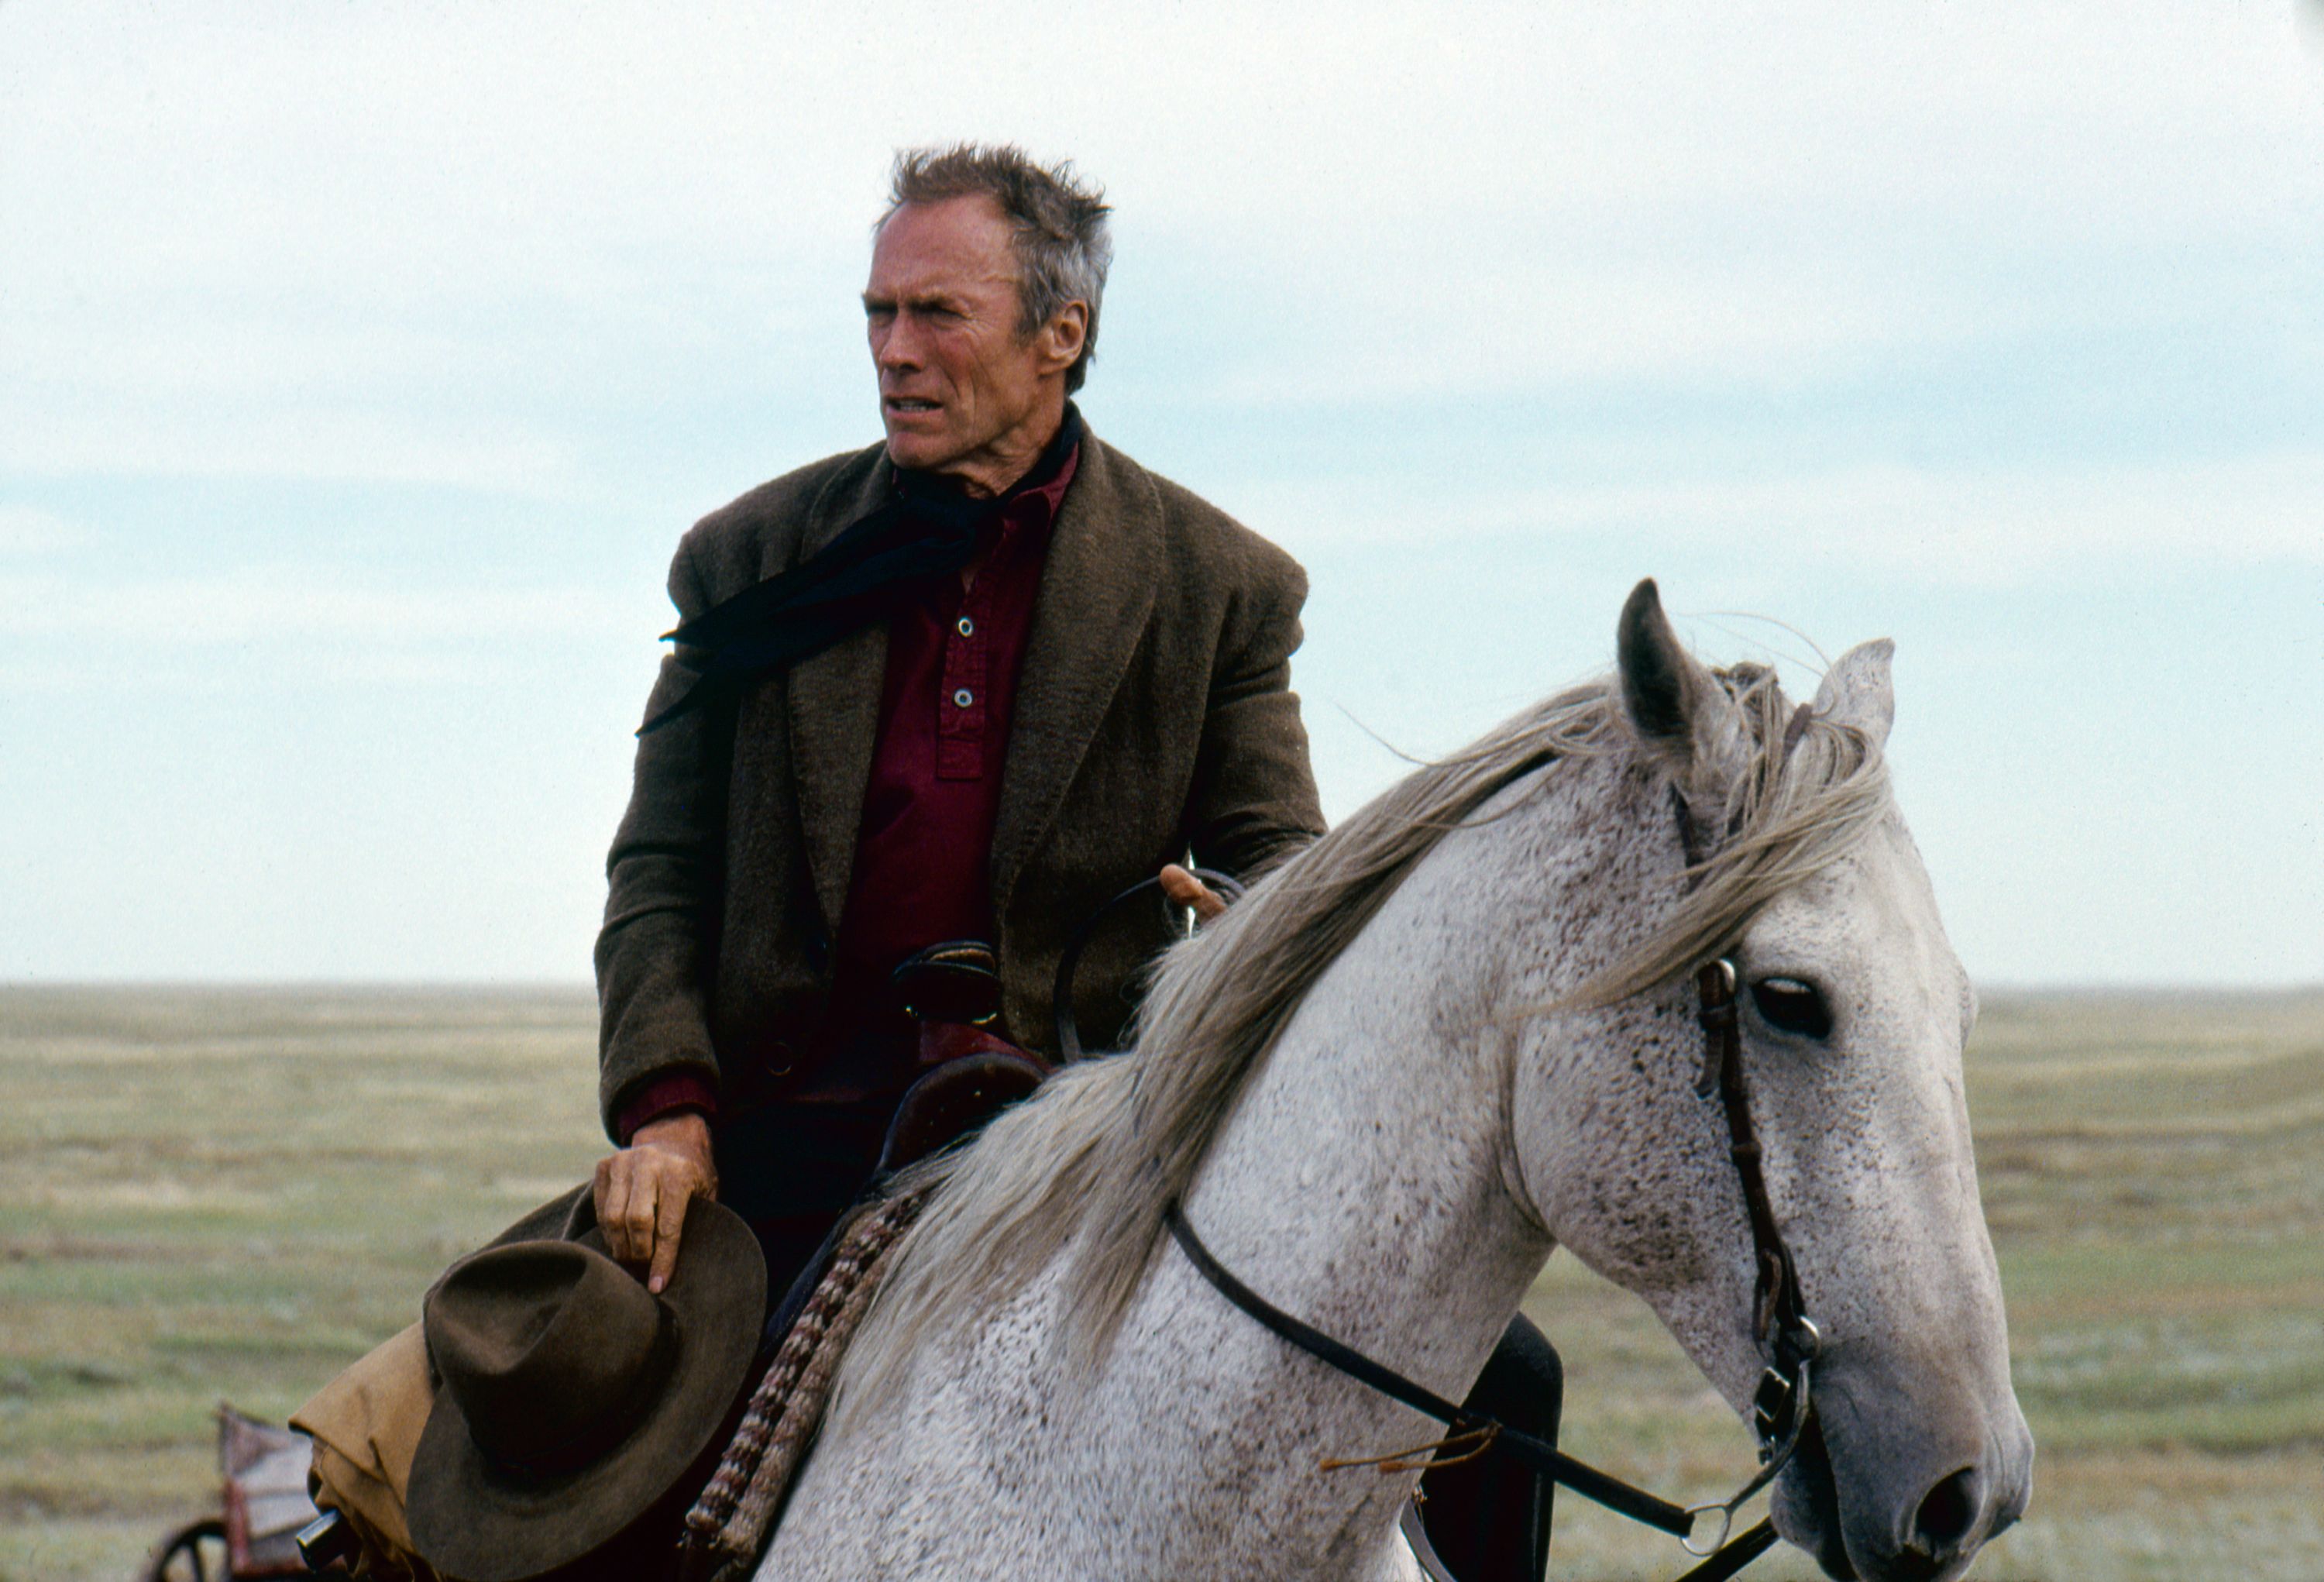 "Tough guy. Western star. Oscar winner. Few artists in film history cast a longer shadow than Clint Eastwood. As he enters his eighth decade in the movies, Warner Bros. celebrates this cinematic icon -- actor, producer, director, master filmmaker -- with a nine-episode docuseries covering the entire breadth of Eastwood's remarkable career." <br /><em>(CNN and Warner Bros. are both part of WarnerMedia.)</em>